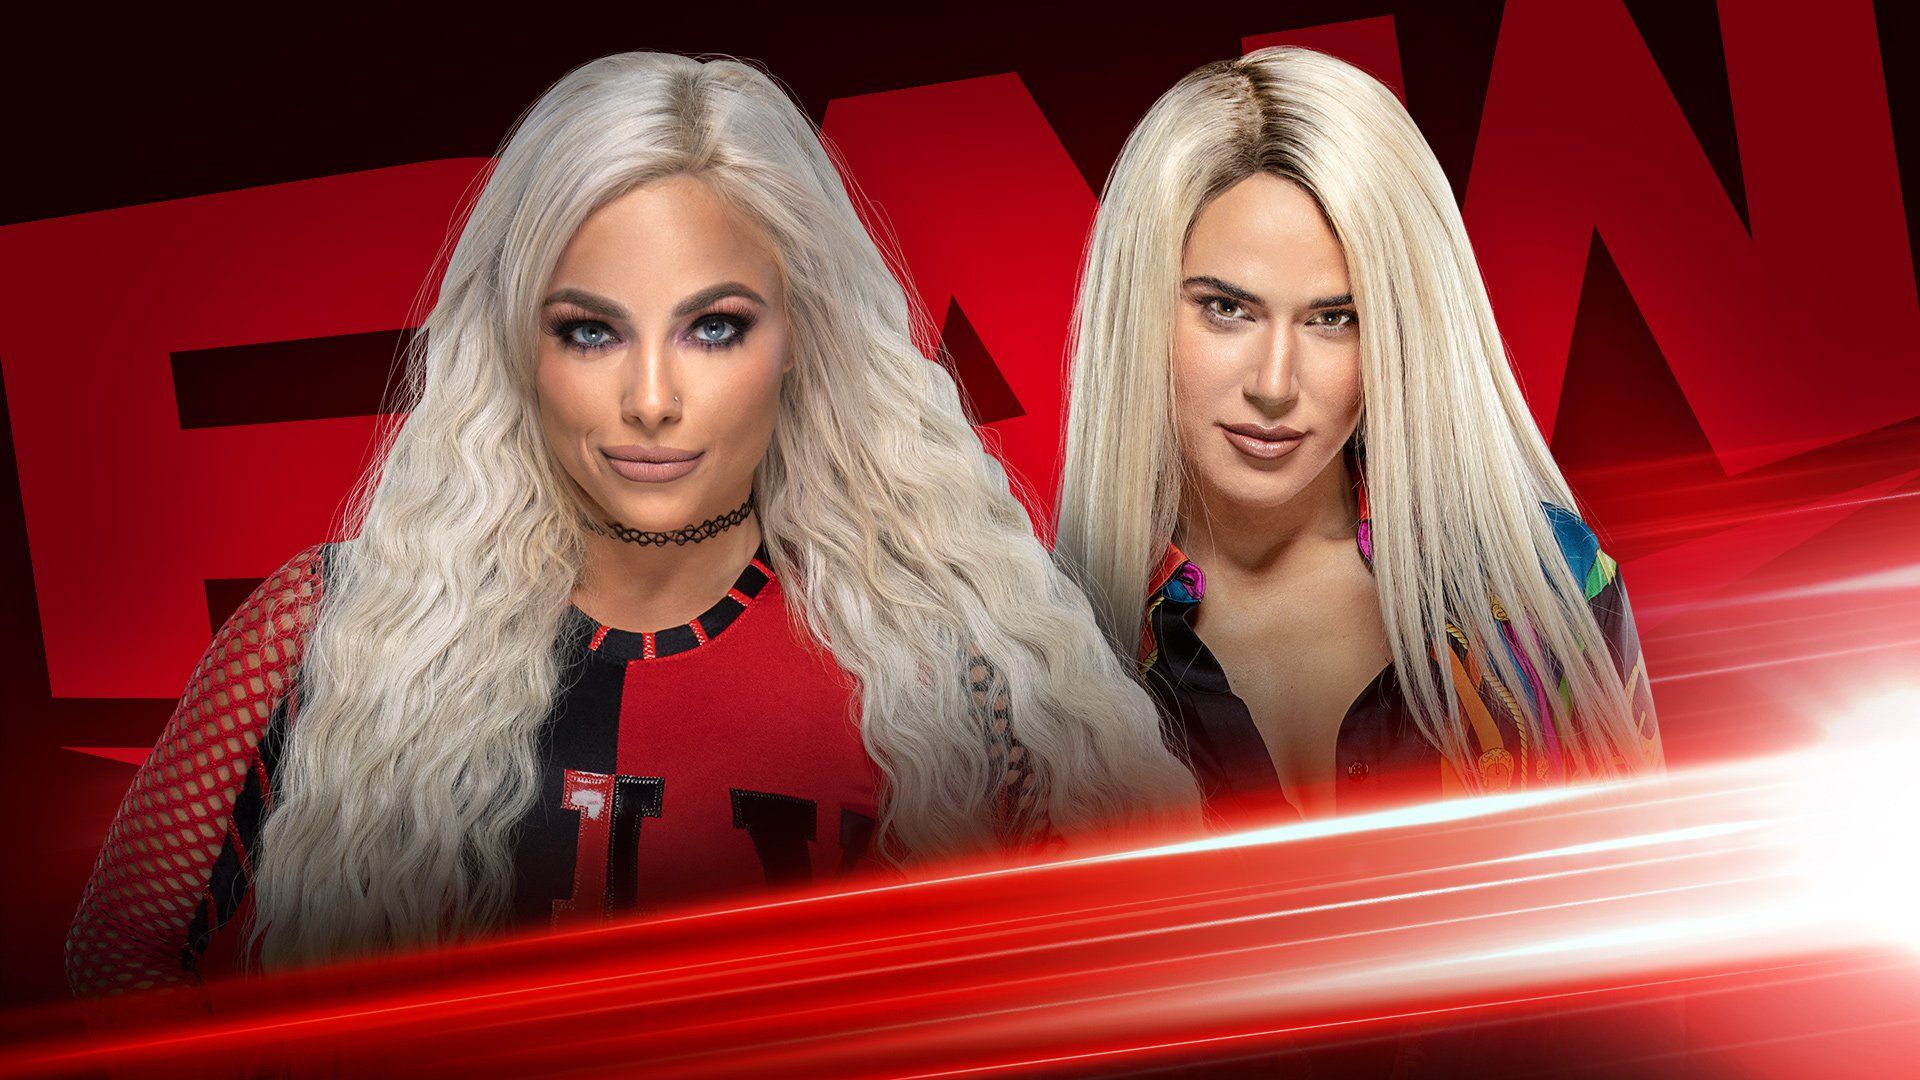 WWE MONDAY NIGHT RAW Highlights For January 2020: Liv Morgan VS Lana, Tag Team Title Match And More